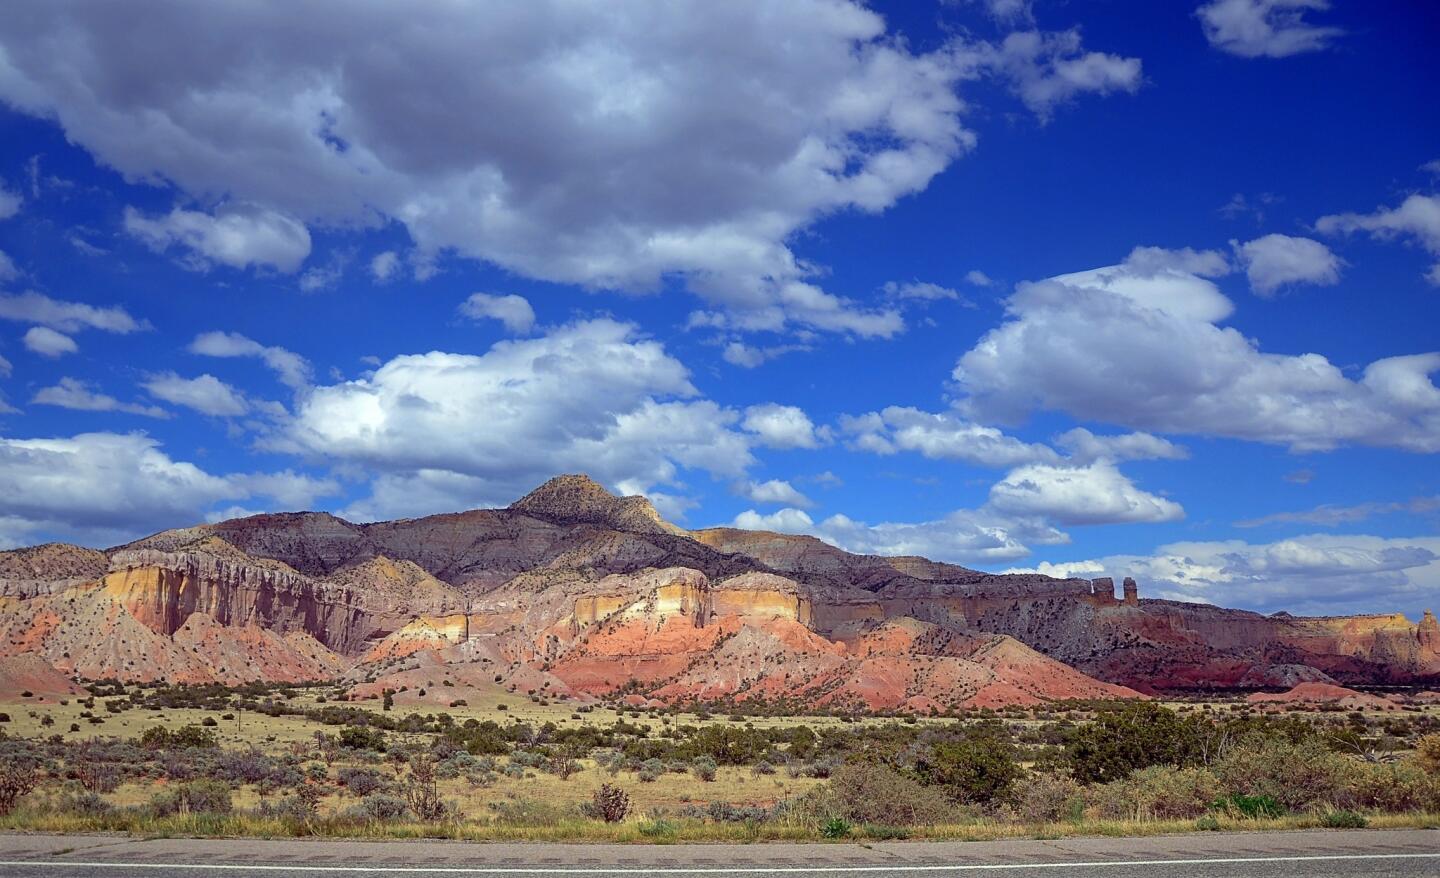 On its way from Pagosa Springs, Co., to Santa Fe, N.M., U.S. 84 runs through a dramatic landscape that includes the New Mexico town of Abiquiu, Abiquiu Lake and the Ghost Ranch, about 15 miles north of Abiquiu. These mountains stand near the entrance to Ghost Ranch.